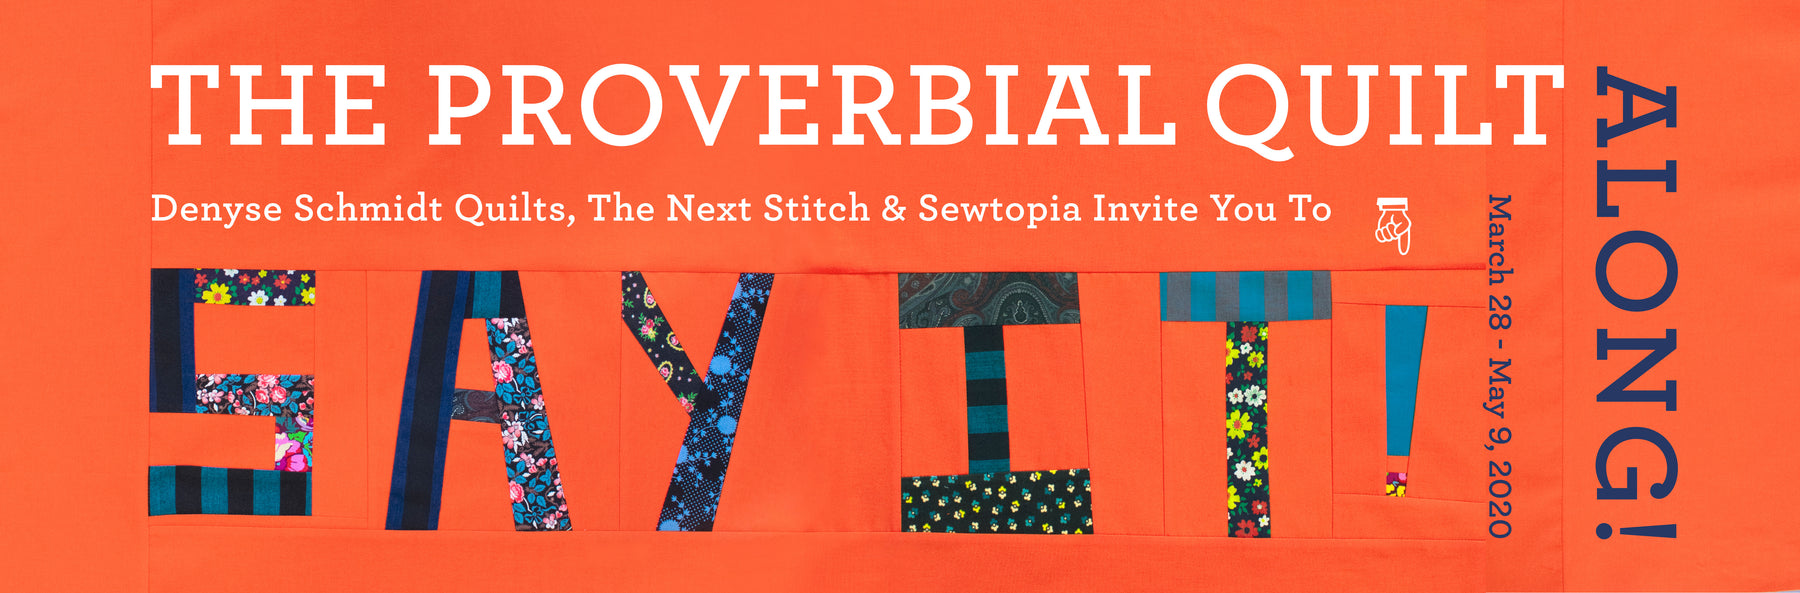 All about the Proverbial Quilt-along prizes